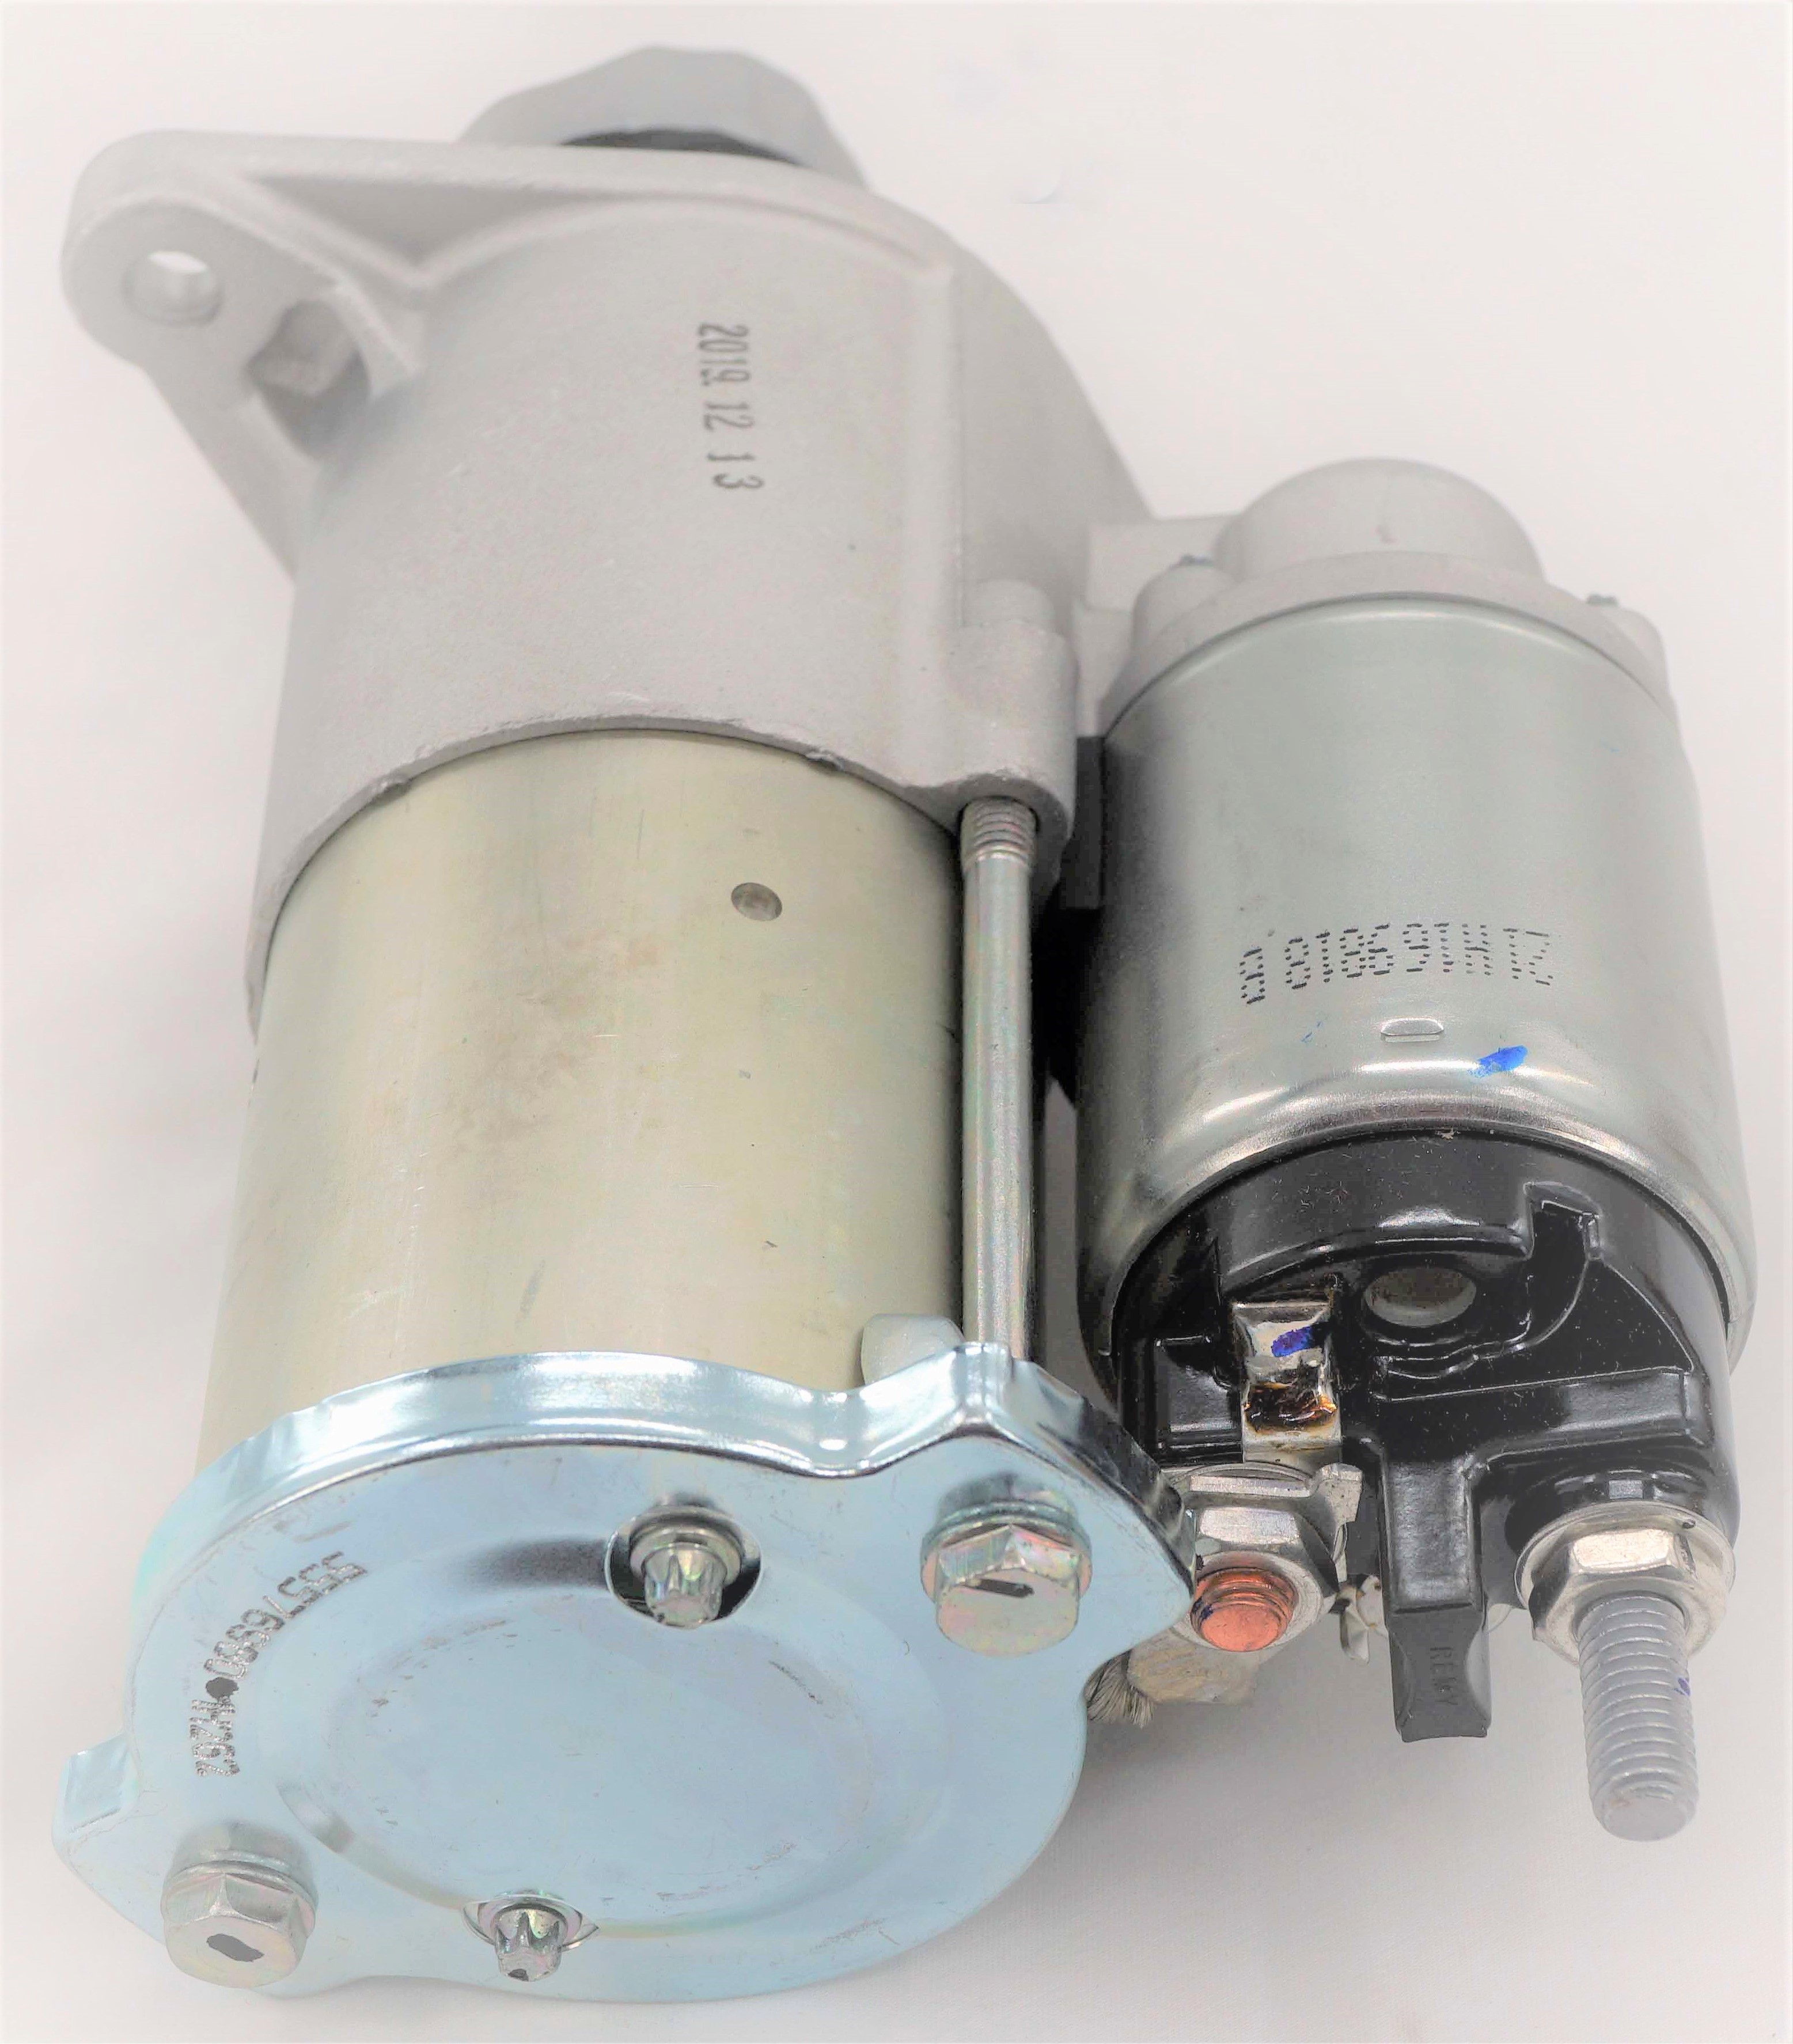 Genuine OEM 55576980 GM Starter Motor Fits Chevy Cruze and Sonic